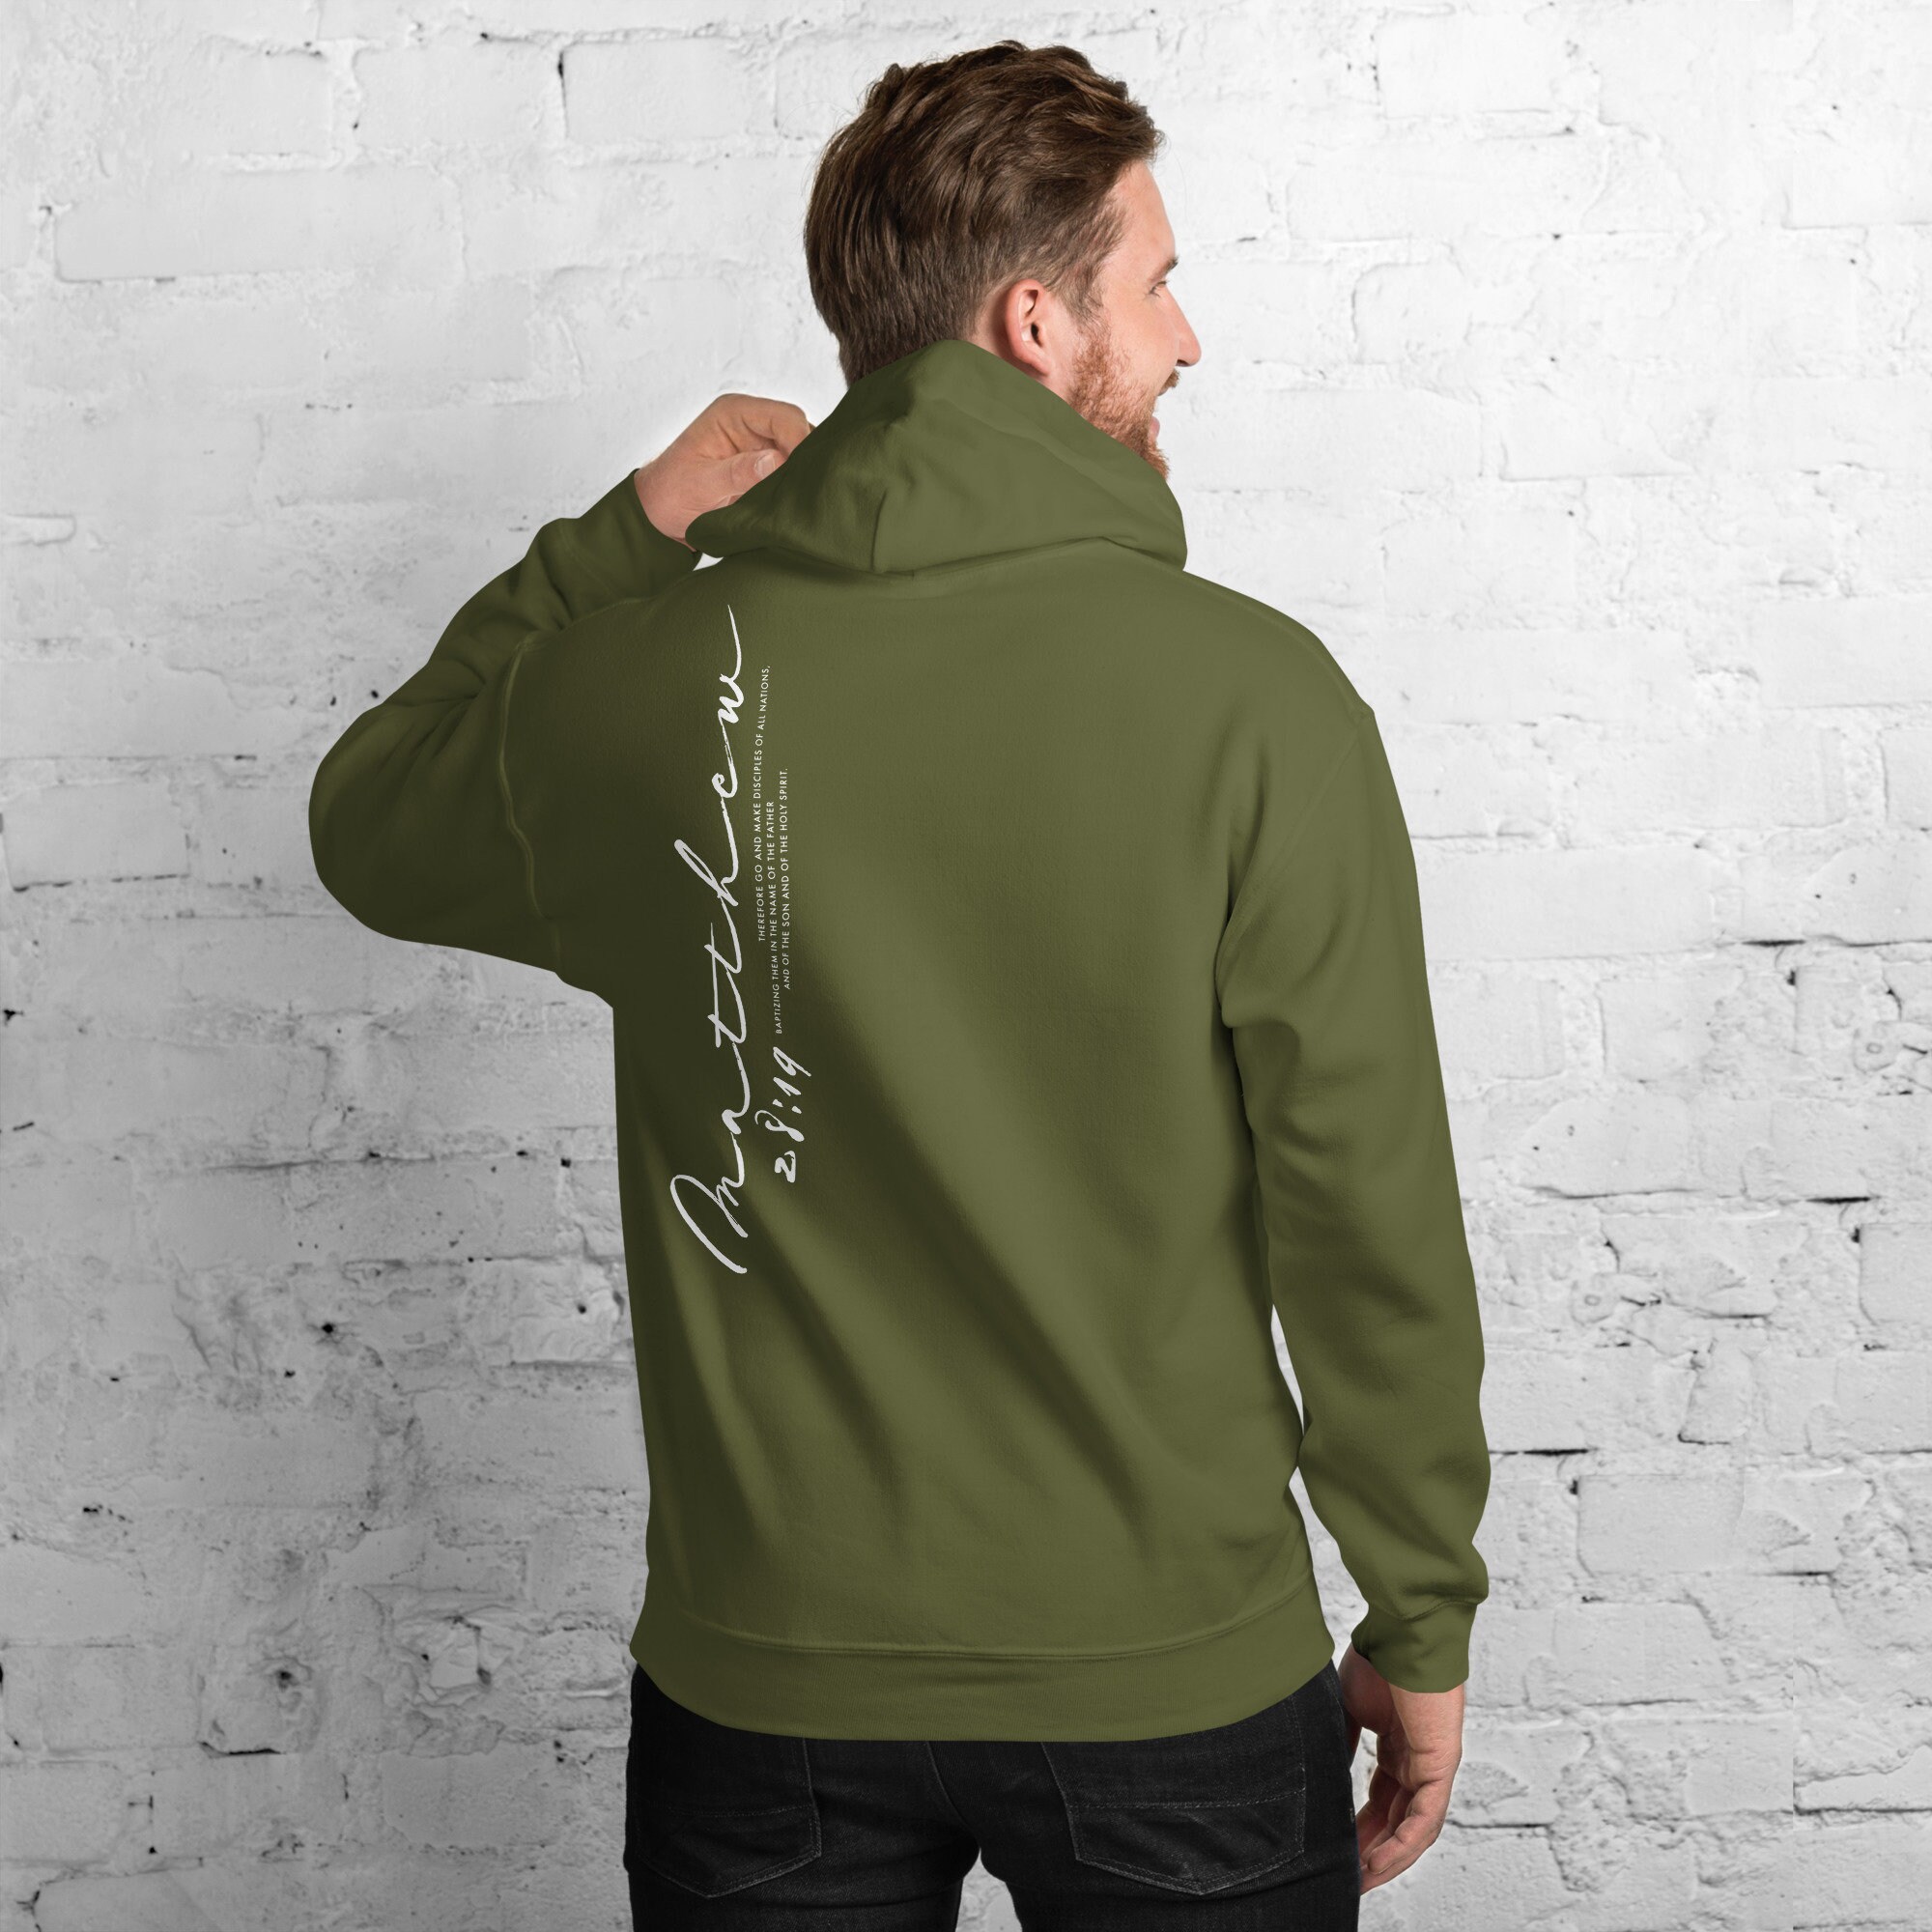 Christian Missionary Scripture Hoodies Go and Make Disciples - Etsy